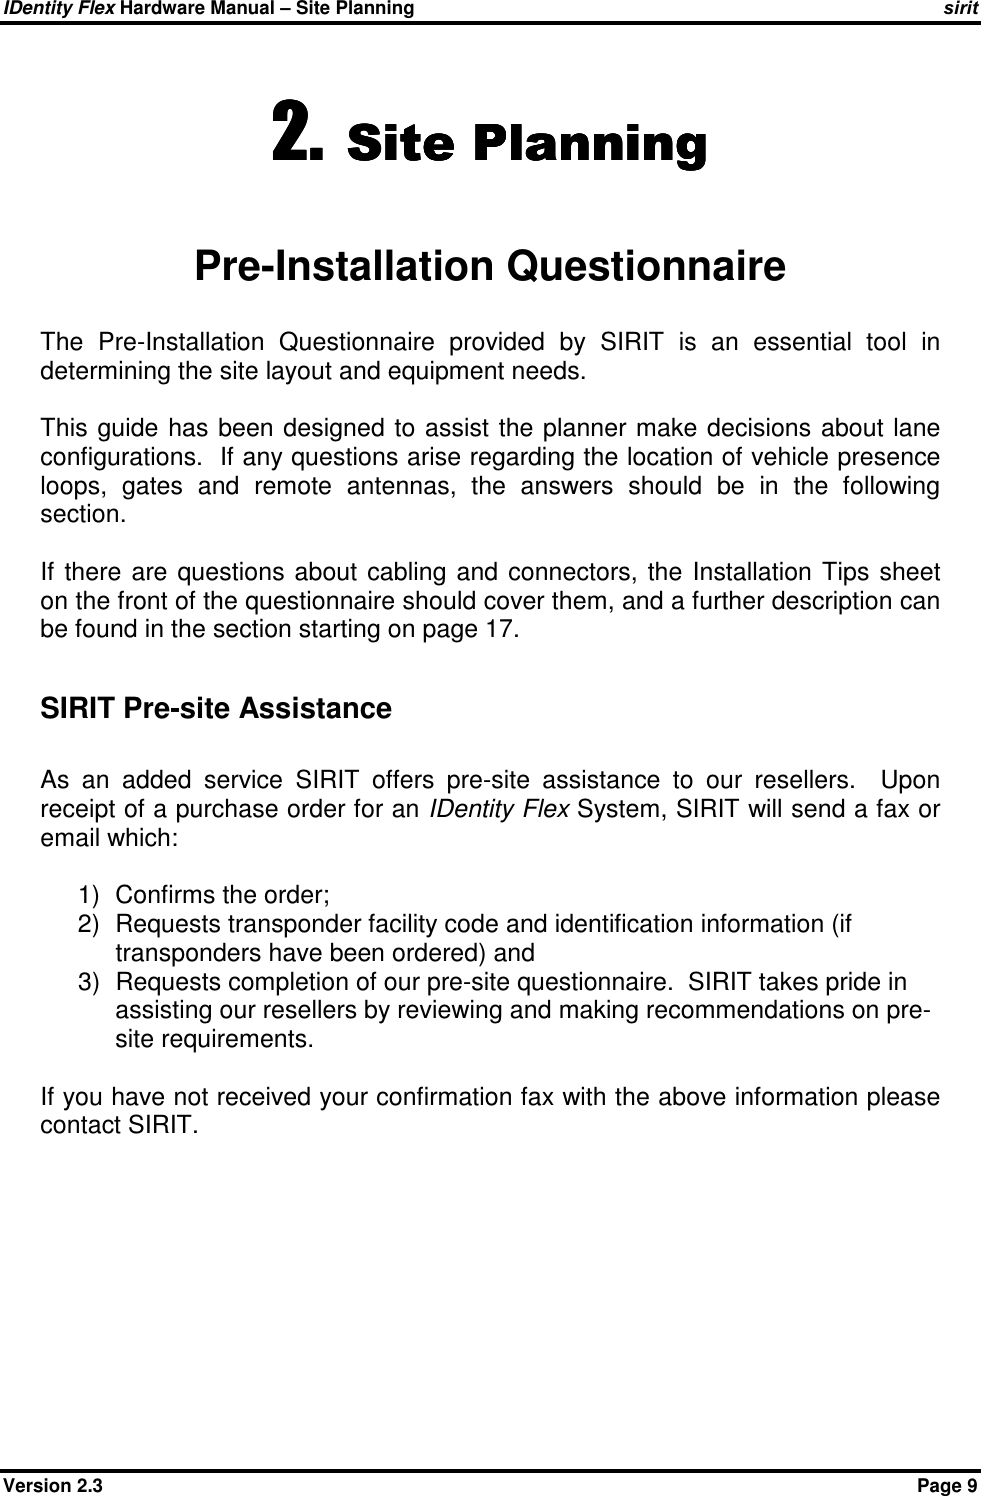 IDentity Flex Hardware Manual – Site Planning    sirit Version 2.3    Page 9 2.2.2.2. Site PlanningSite PlanningSite PlanningSite Planning     Pre-Installation Questionnaire The  Pre-Installation  Questionnaire  provided  by  SIRIT  is  an  essential  tool  in determining the site layout and equipment needs.    This  guide has been  designed  to assist  the planner make decisions about lane configurations.  If any questions arise regarding the location of vehicle presence loops,  gates  and  remote  antennas,  the  answers  should  be  in  the  following section.  If  there  are  questions  about  cabling  and  connectors,  the  Installation  Tips  sheet on the front of the questionnaire should cover them, and a further description can be found in the section starting on page 17.  SIRIT Pre-site Assistance  As  an  added  service  SIRIT  offers  pre-site  assistance  to  our  resellers.    Upon receipt of a purchase order for an IDentity Flex System, SIRIT will send a fax or email which:  1)  Confirms the order;  2)  Requests transponder facility code and identification information (if transponders have been ordered) and  3)  Requests completion of our pre-site questionnaire.  SIRIT takes pride in assisting our resellers by reviewing and making recommendations on pre-site requirements.    If you have not received your confirmation fax with the above information please contact SIRIT.  